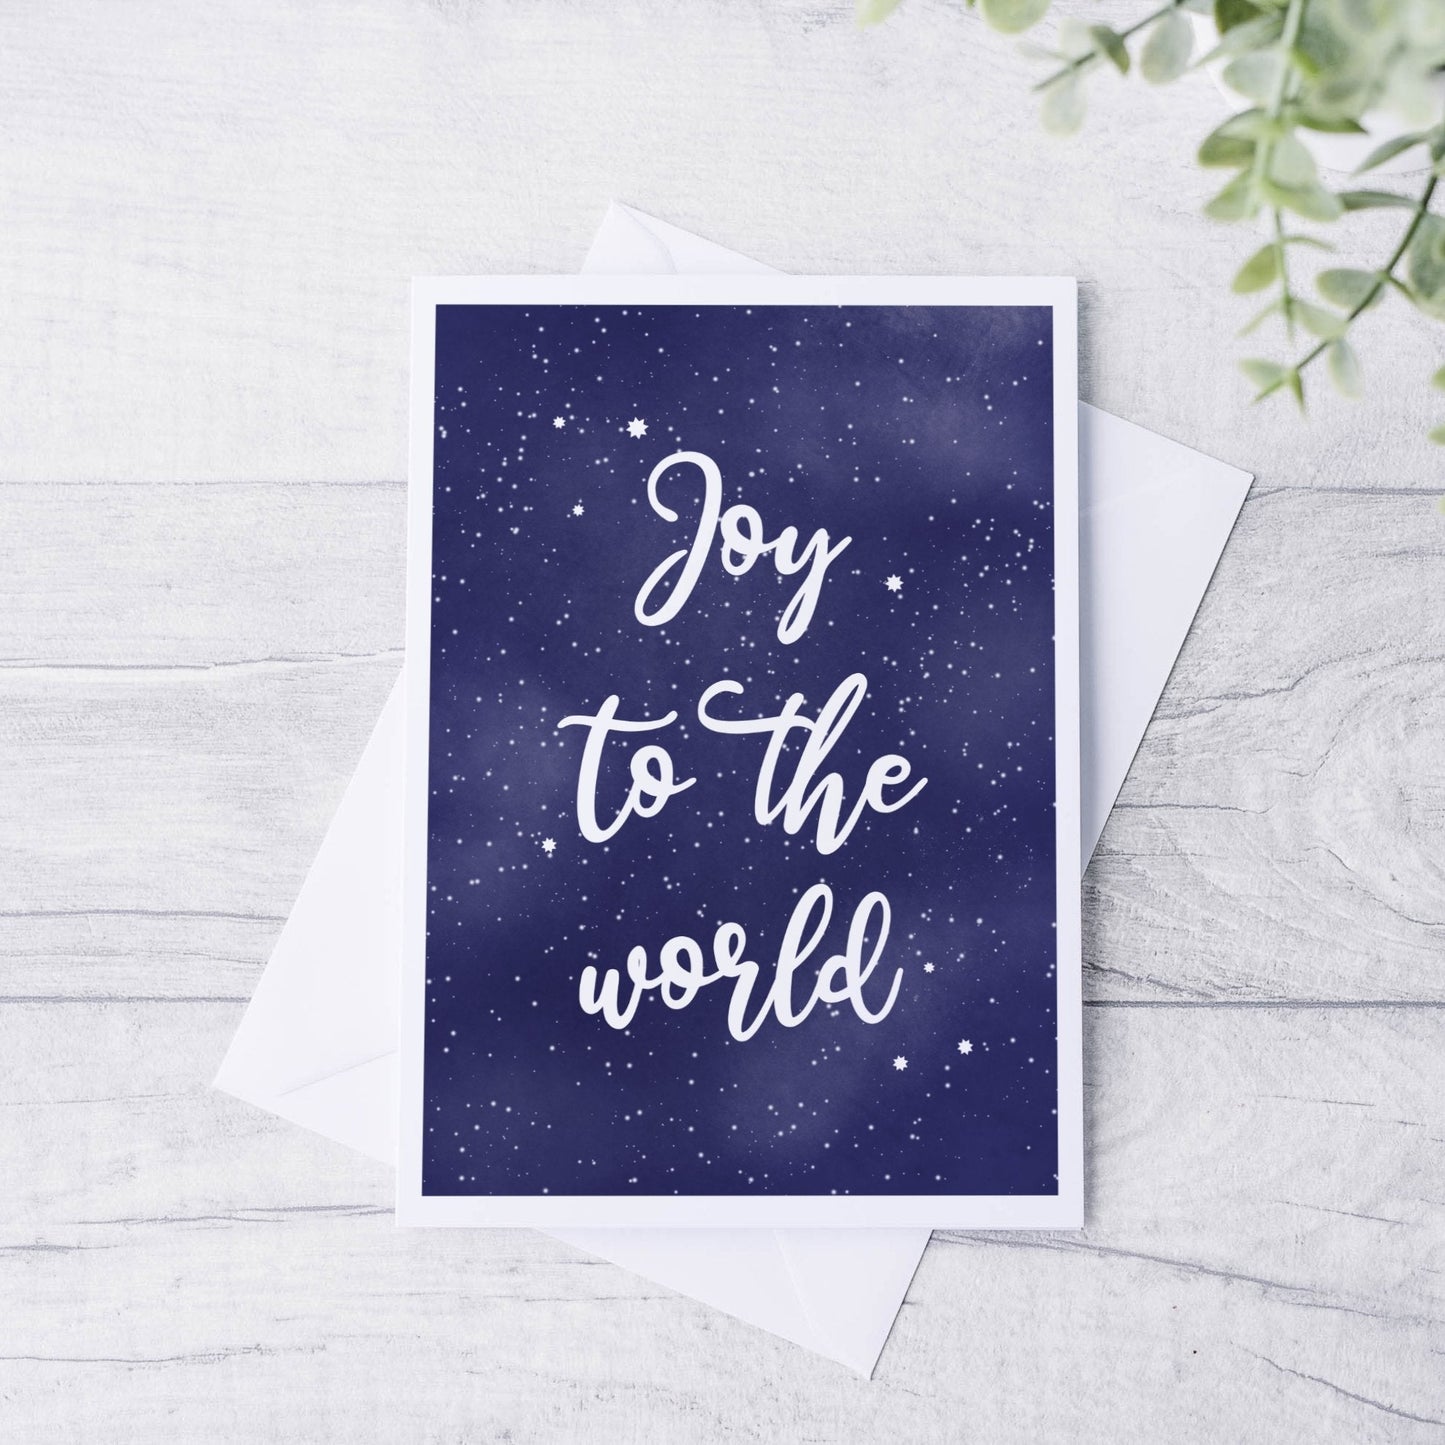 Joy to the world christmas card - Dolly and Fred Designs